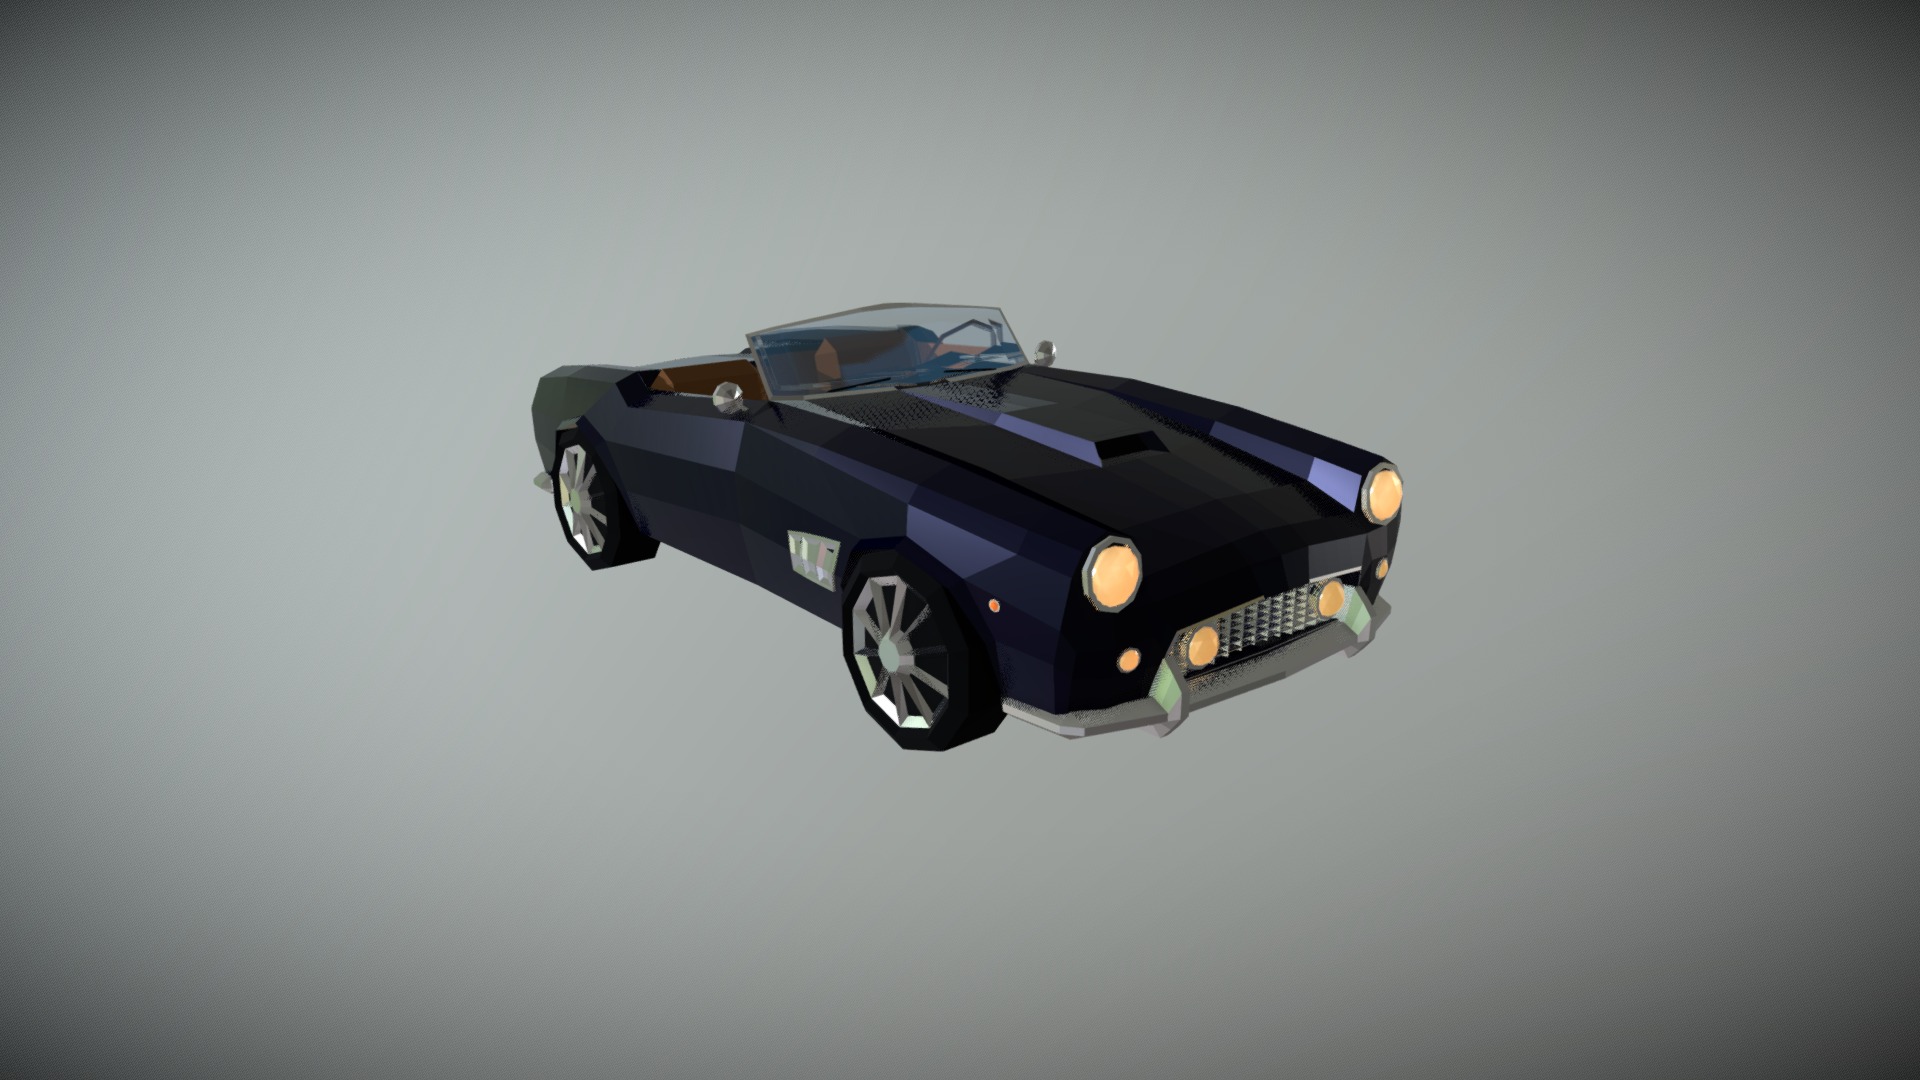 3D model Low Poly Roadster - This is a 3D model of the Low Poly Roadster. The 3D model is about a black and blue sports car.